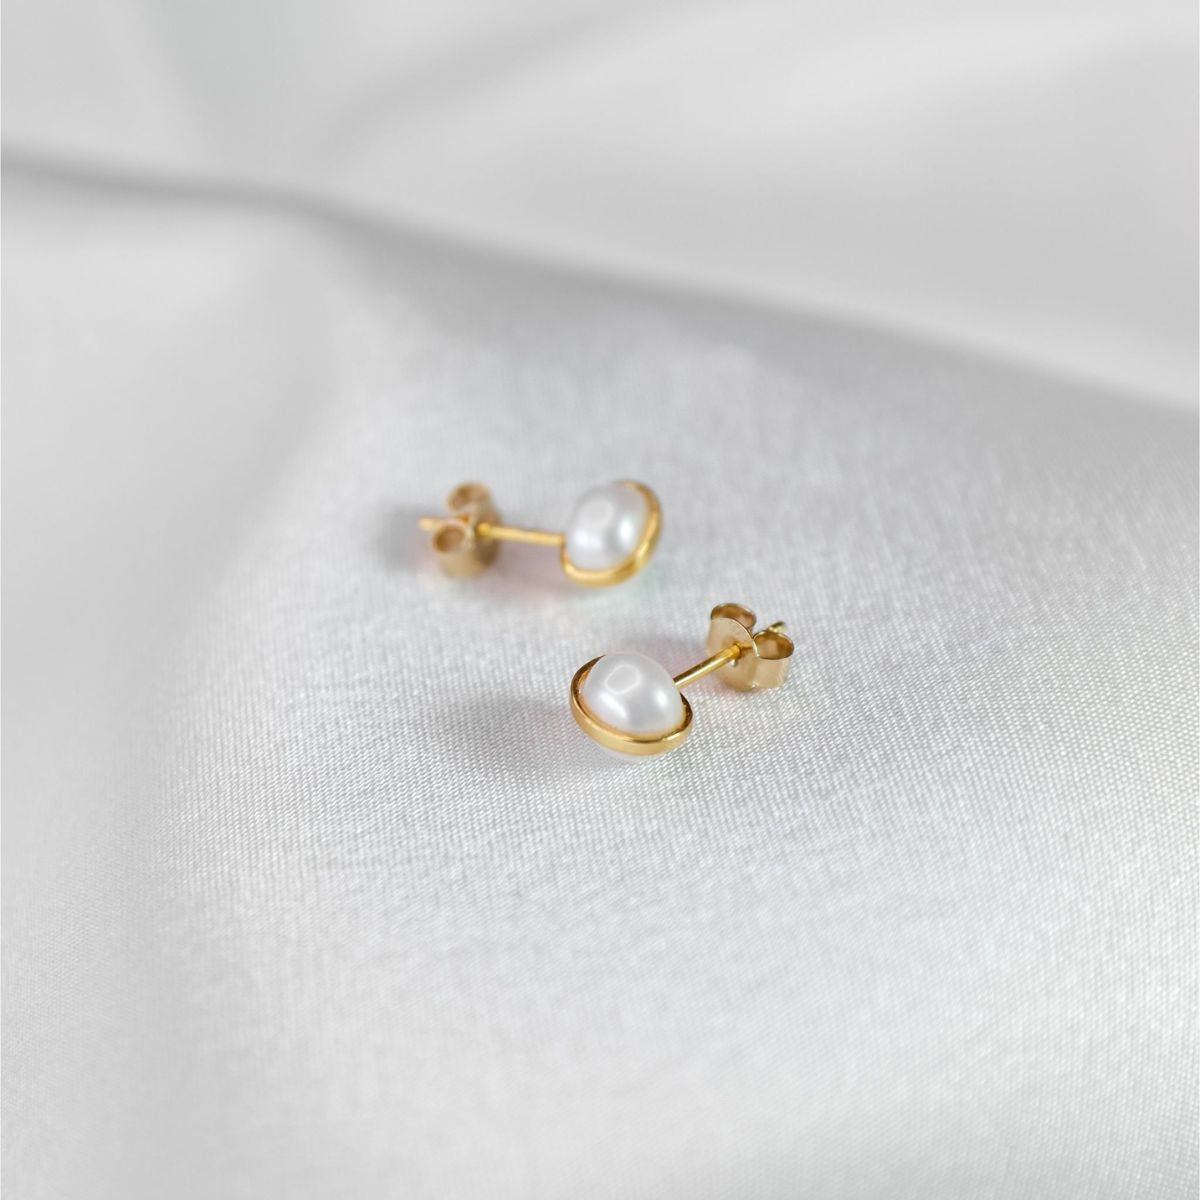 a pair of white pearl earrings on a white cloth